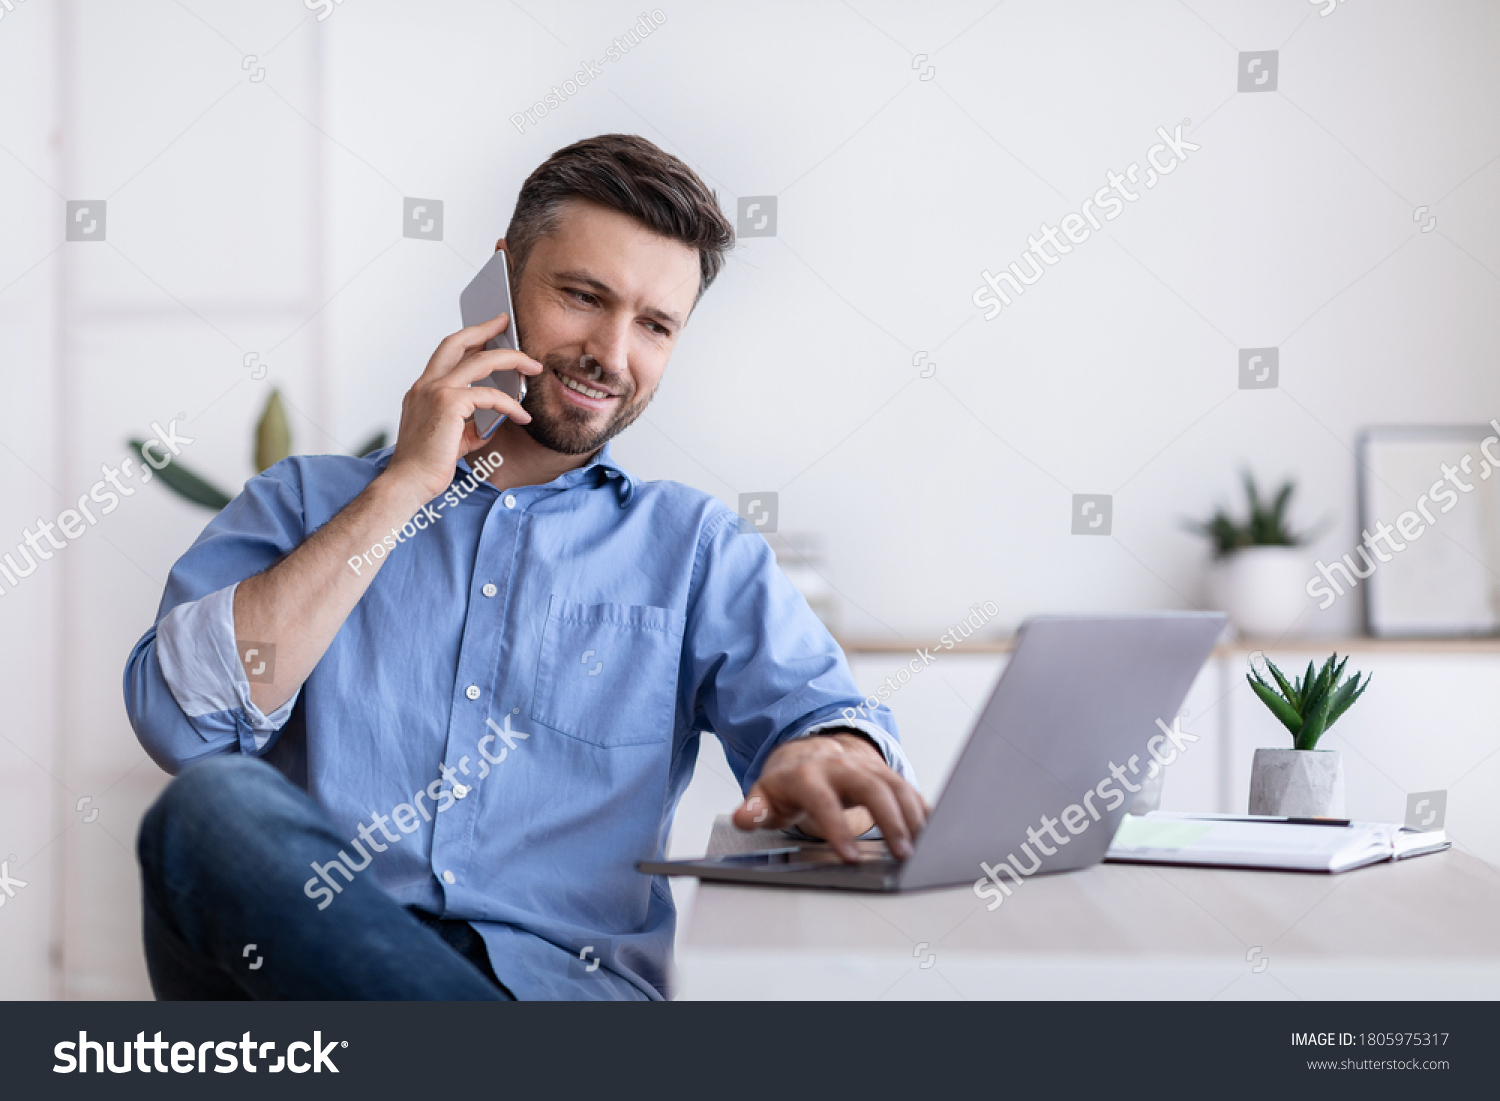 Cheerful Young Man Working Remotely From Home Office With Cellphone And Laptop, Sitting At Desk In Room, Copy Space #1805975317